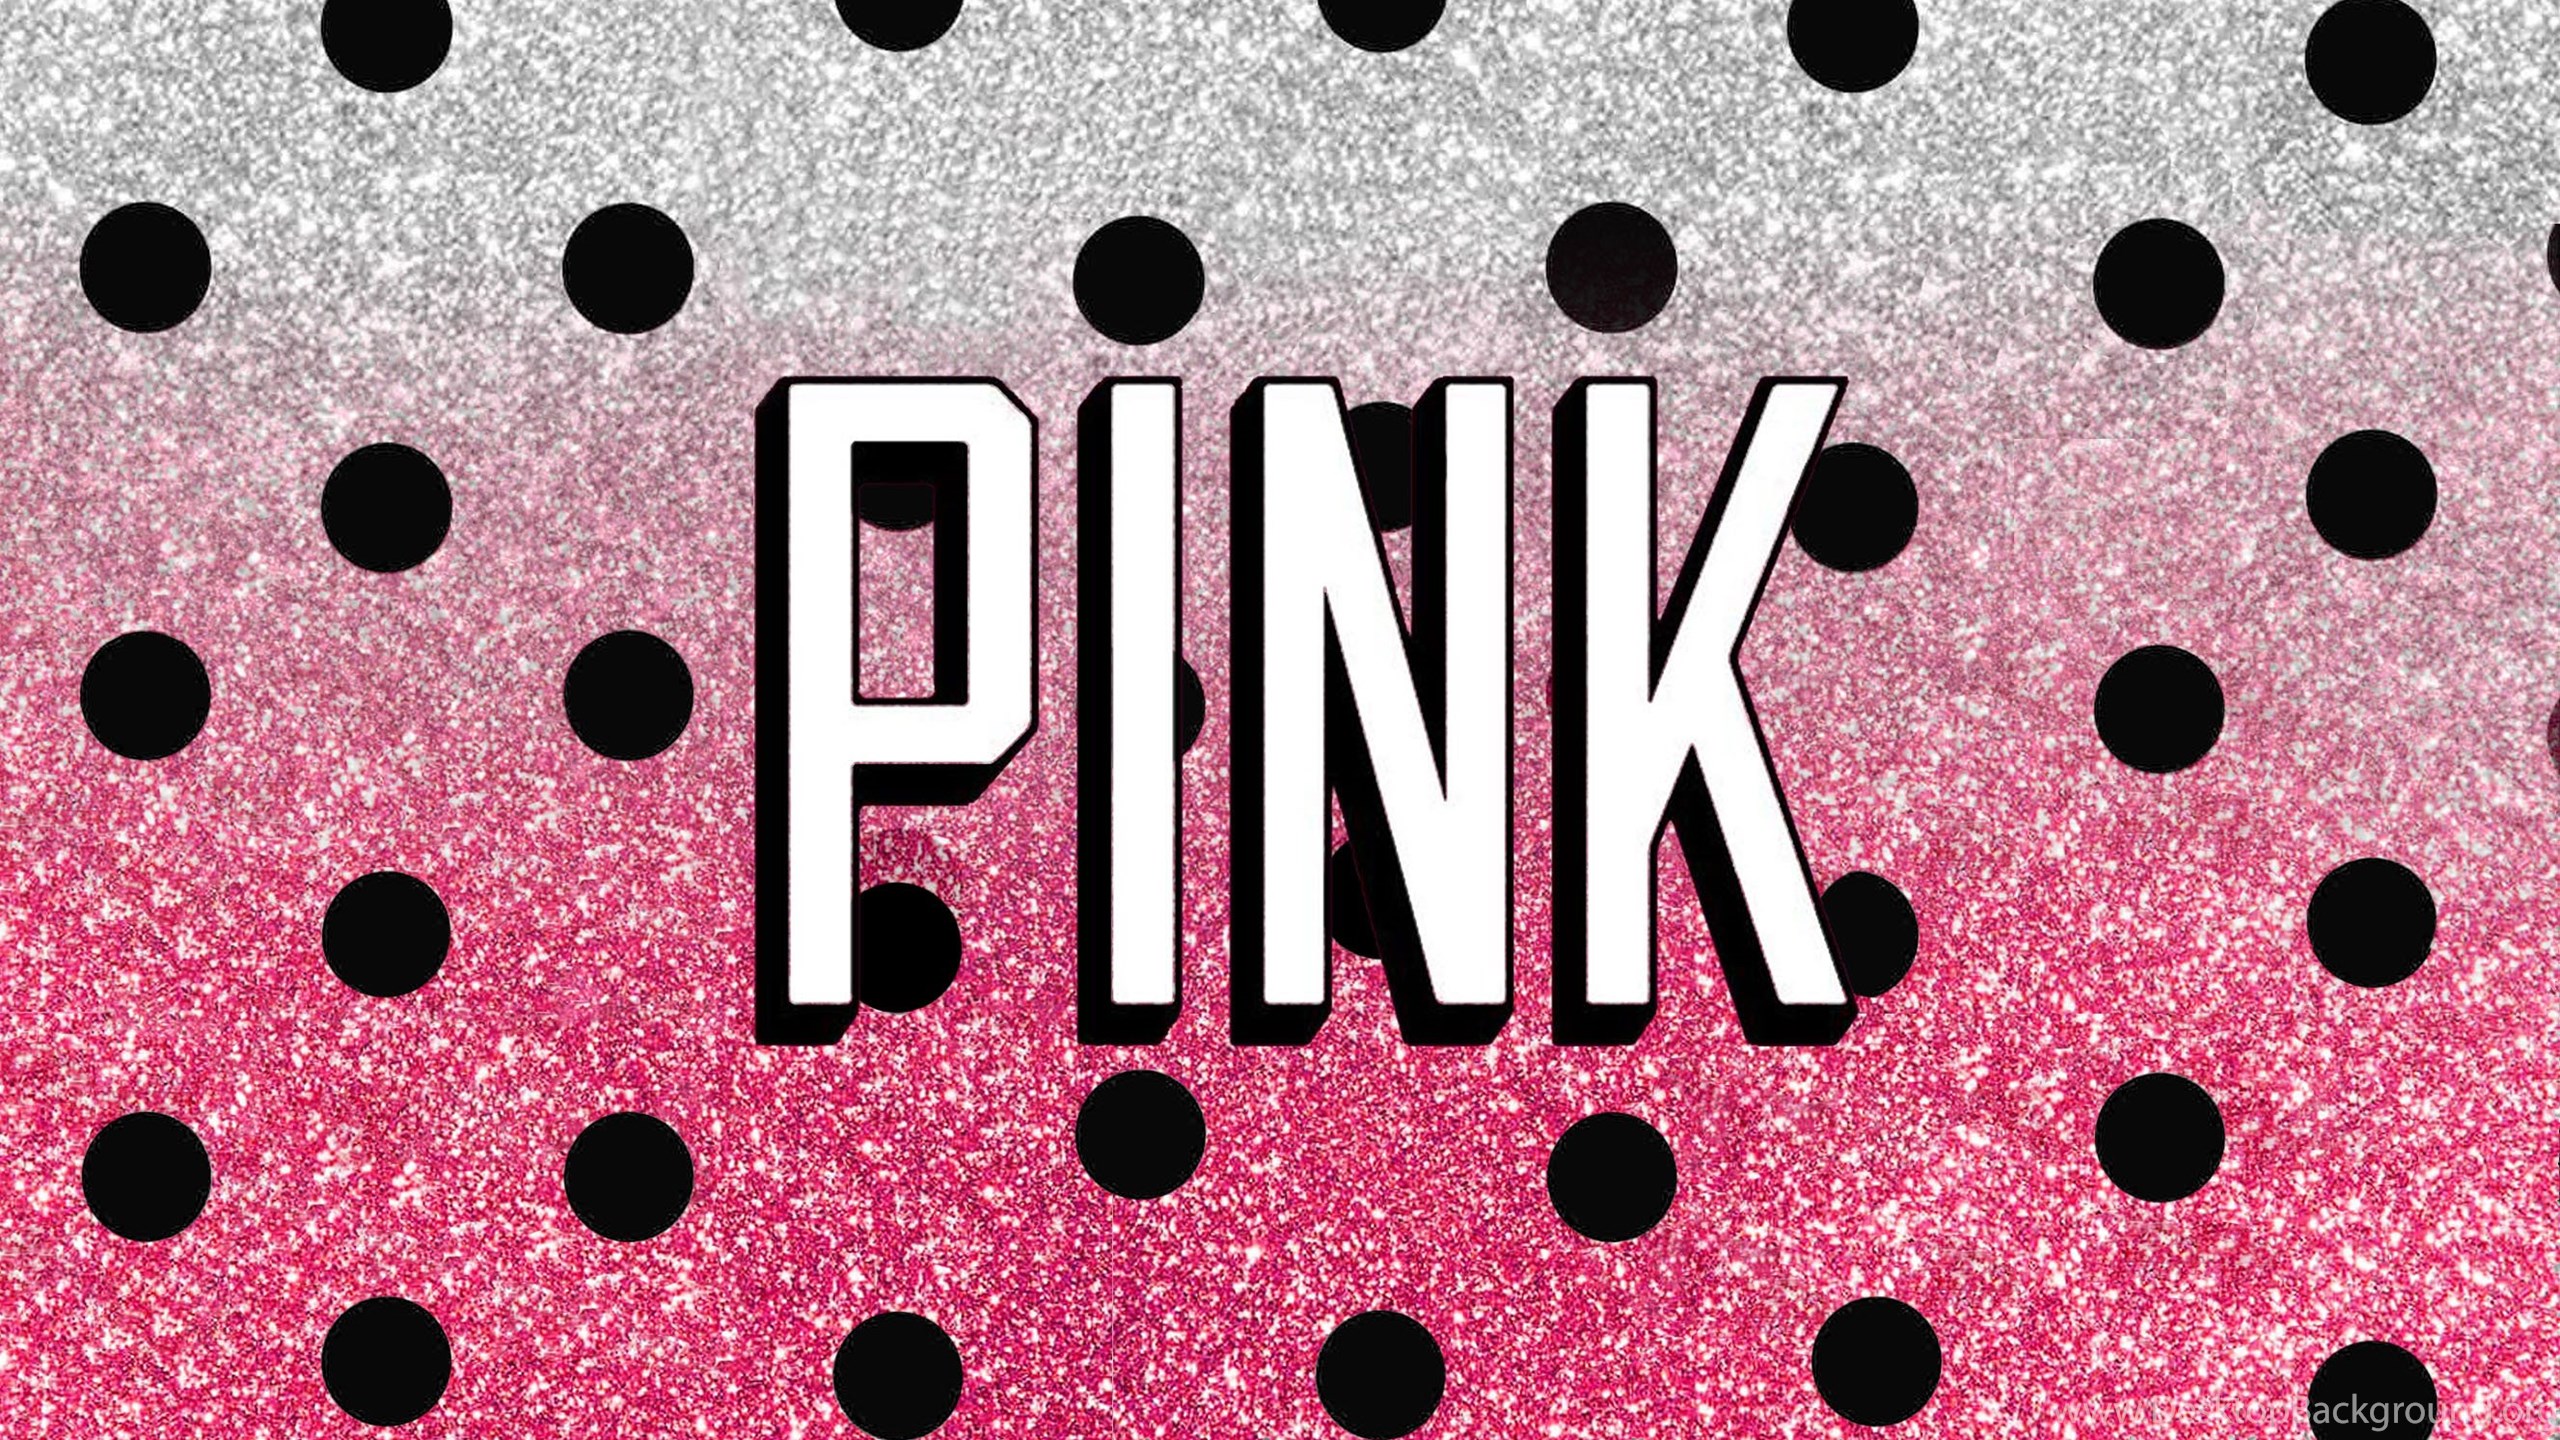  Pink  Victorias Secret Wallpapers  1 Free Hd  Wallpapers  ImgX 